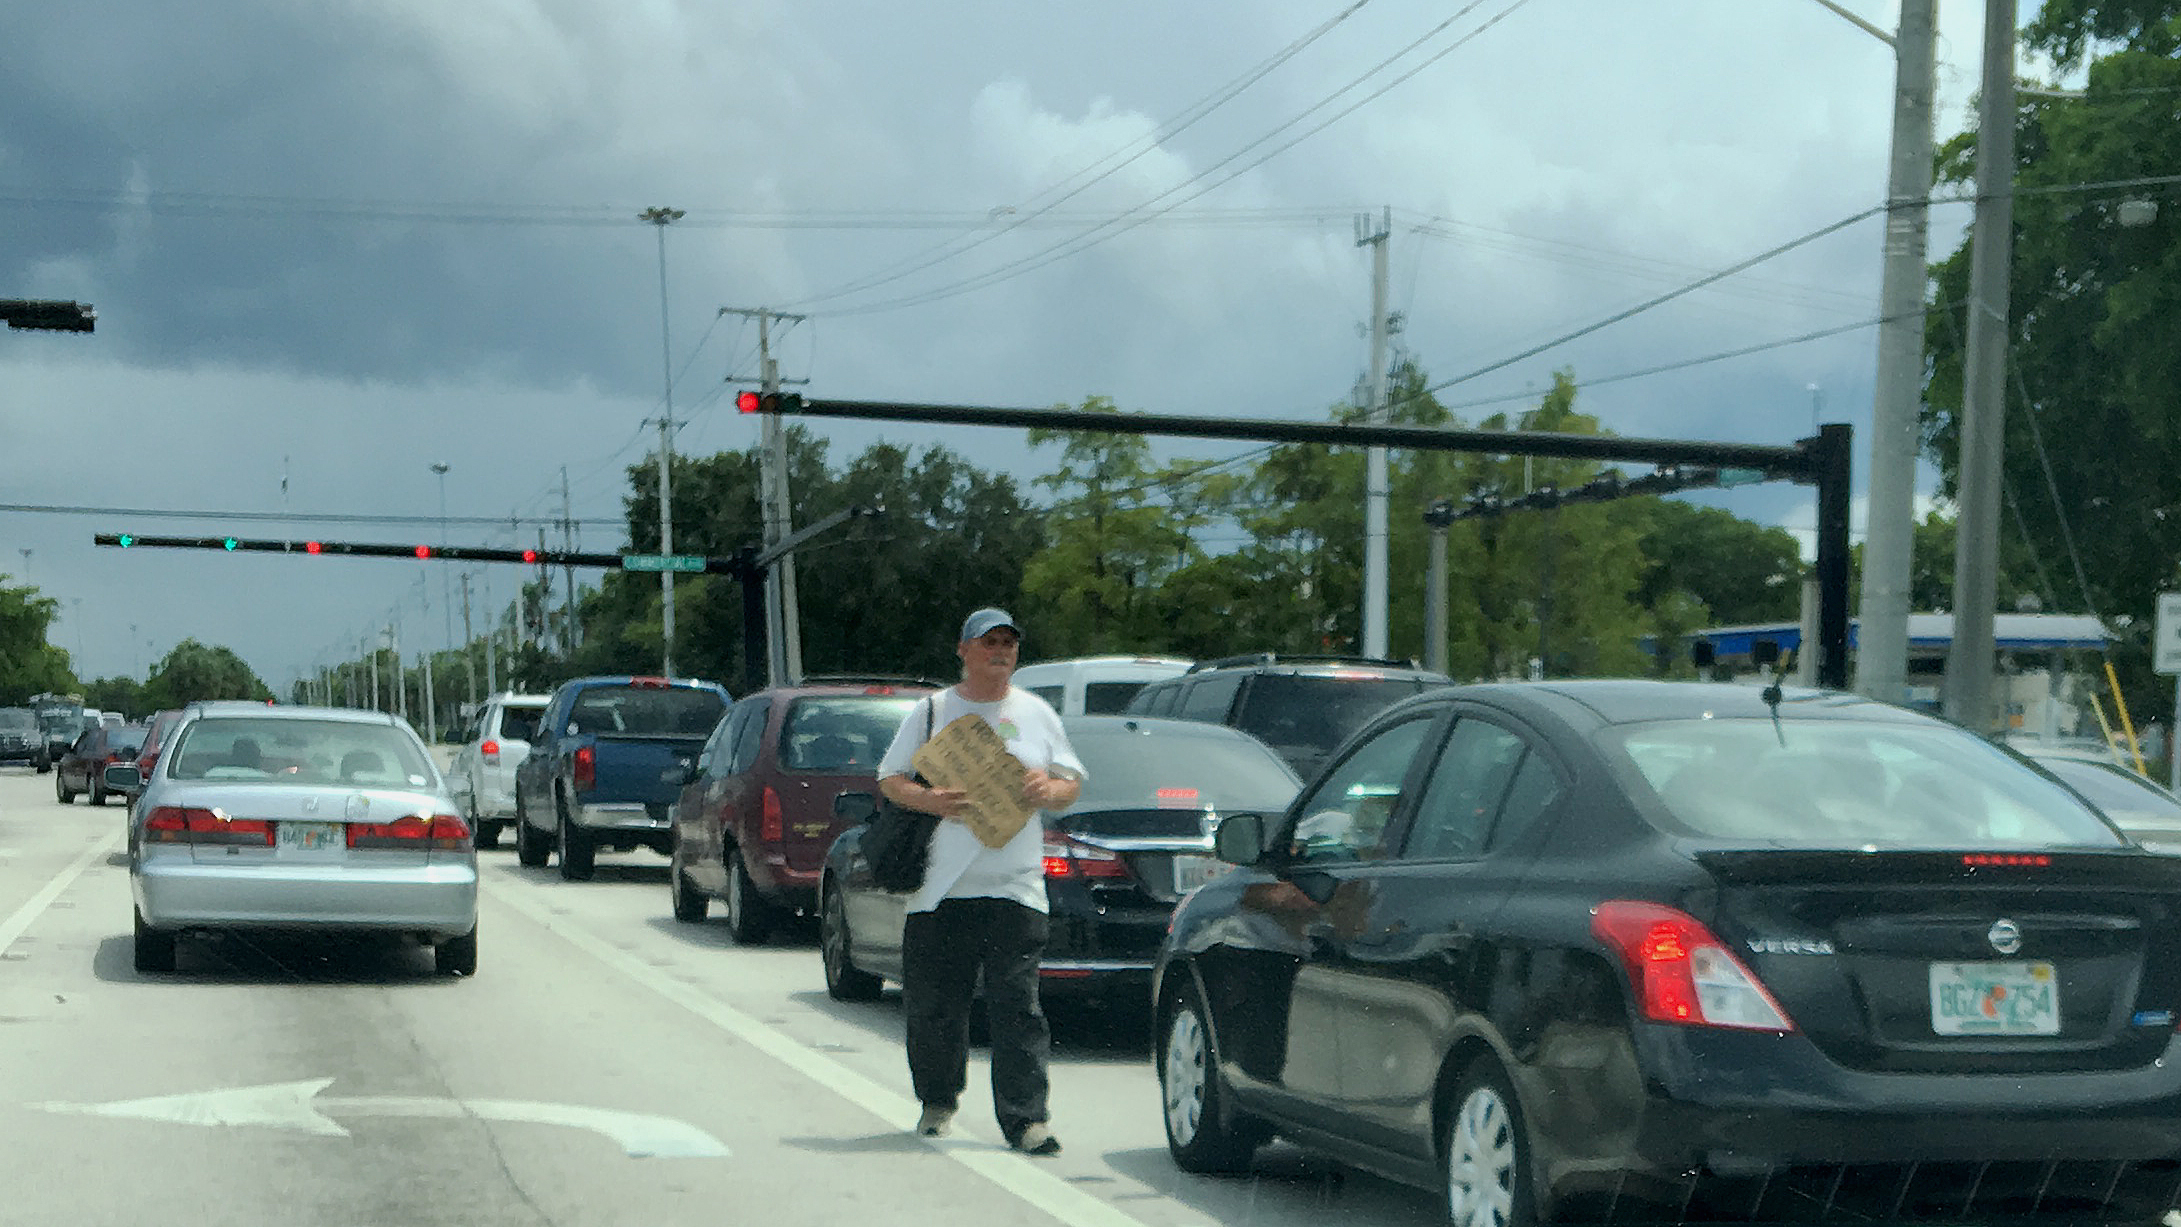 Panhandling still continuing in Tamarac June 27, 2016 on year after ordinance was passed.